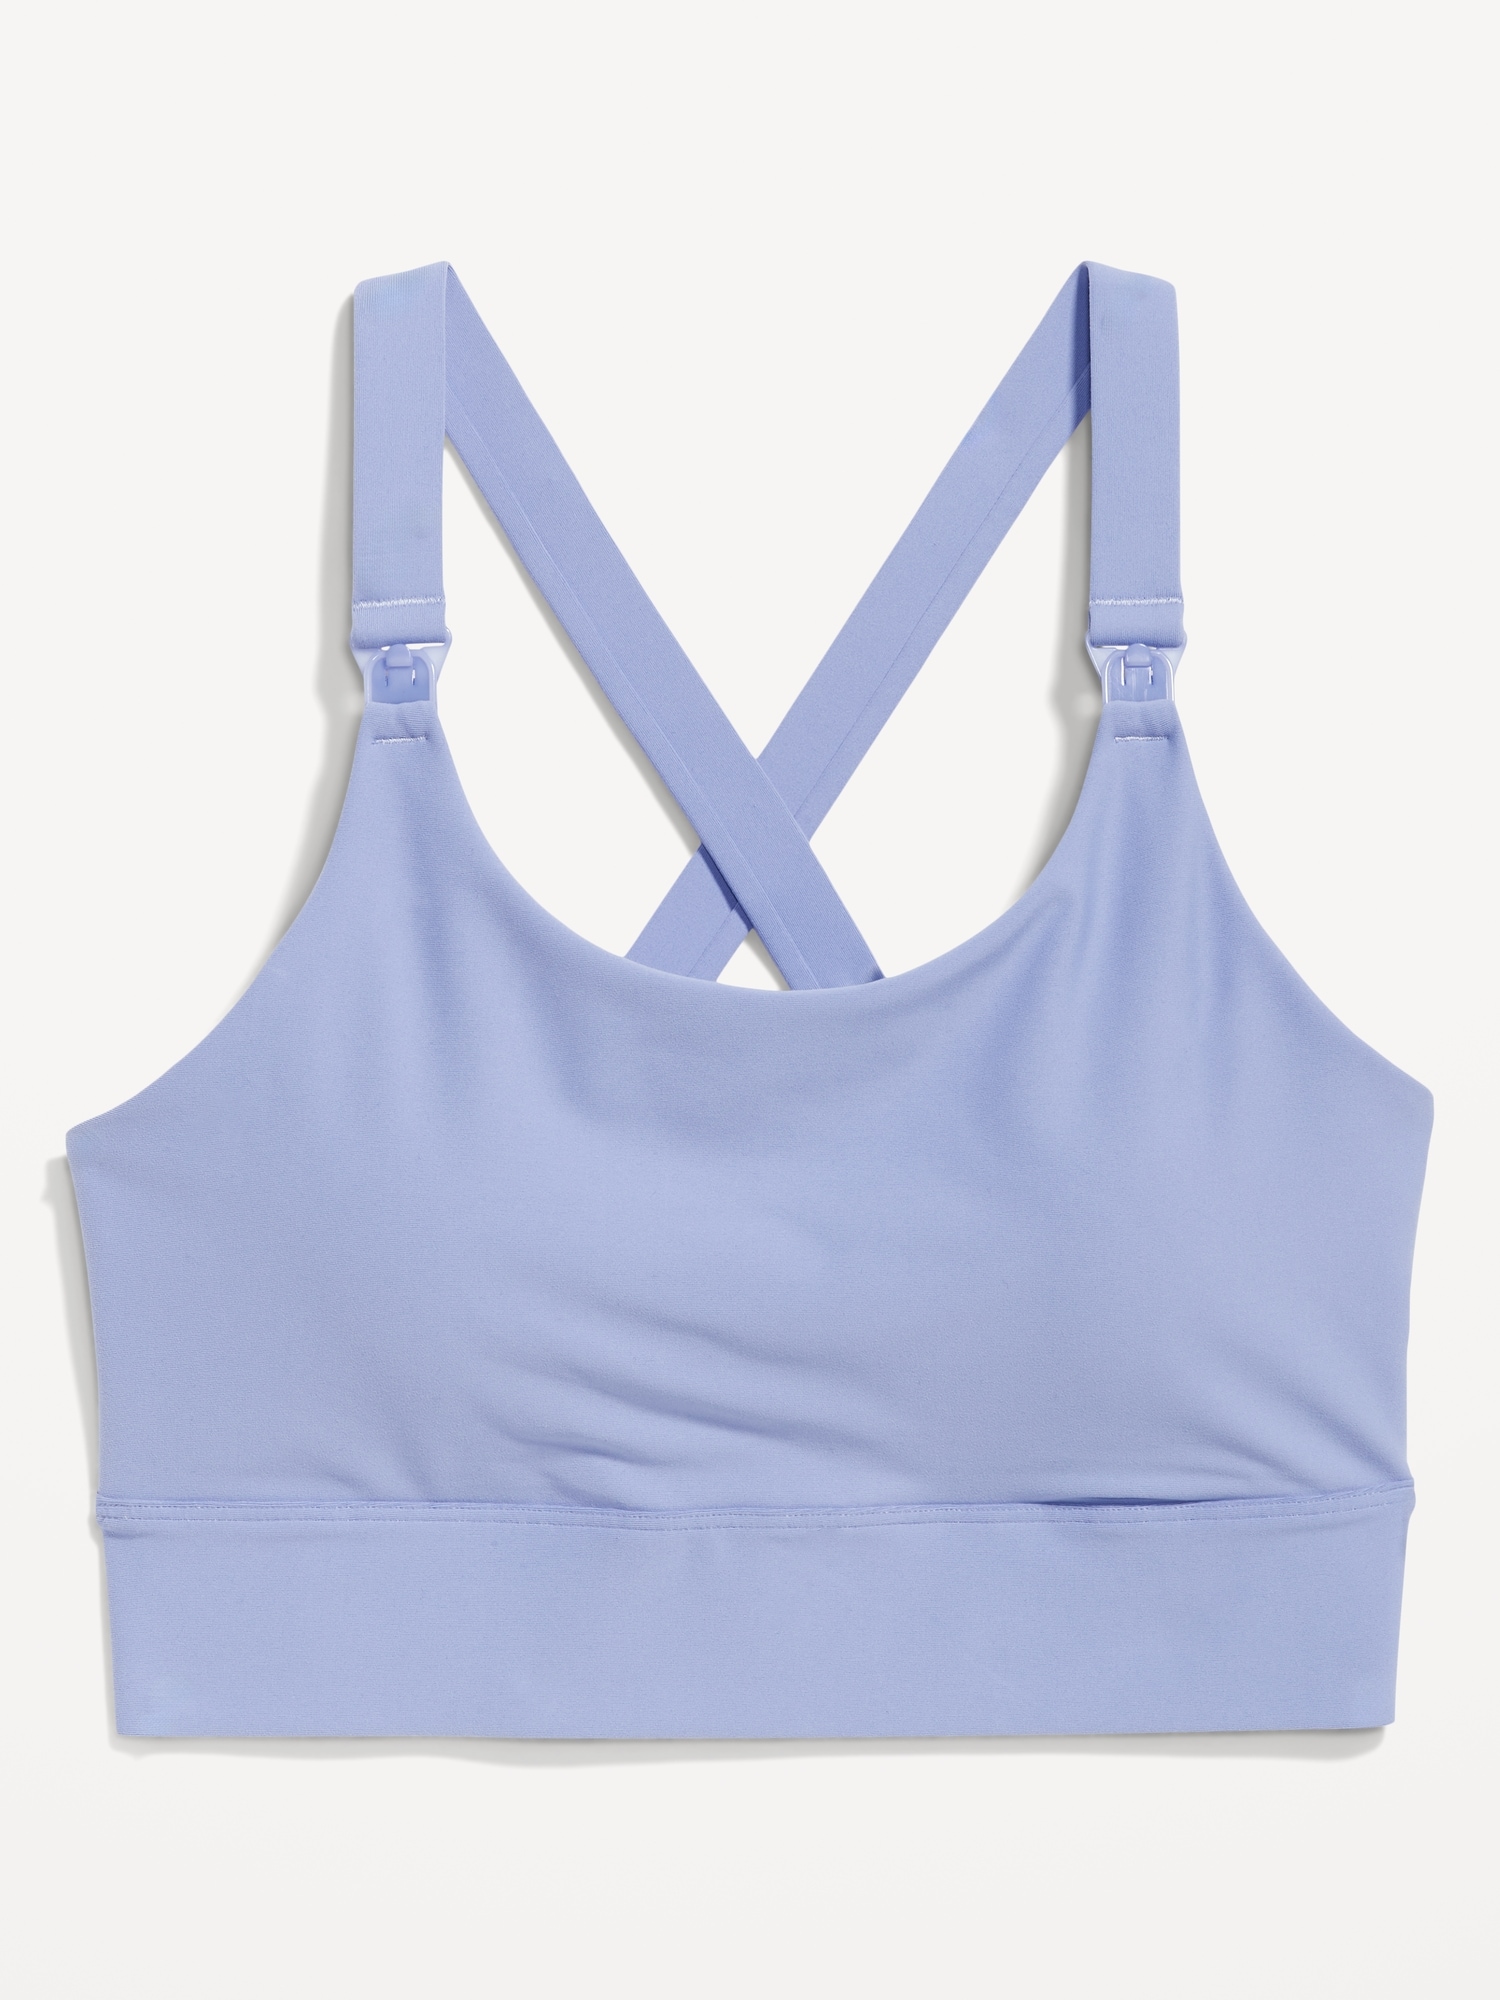 Old Navy Active Sports Bra XL Blue - $9 - From loreto